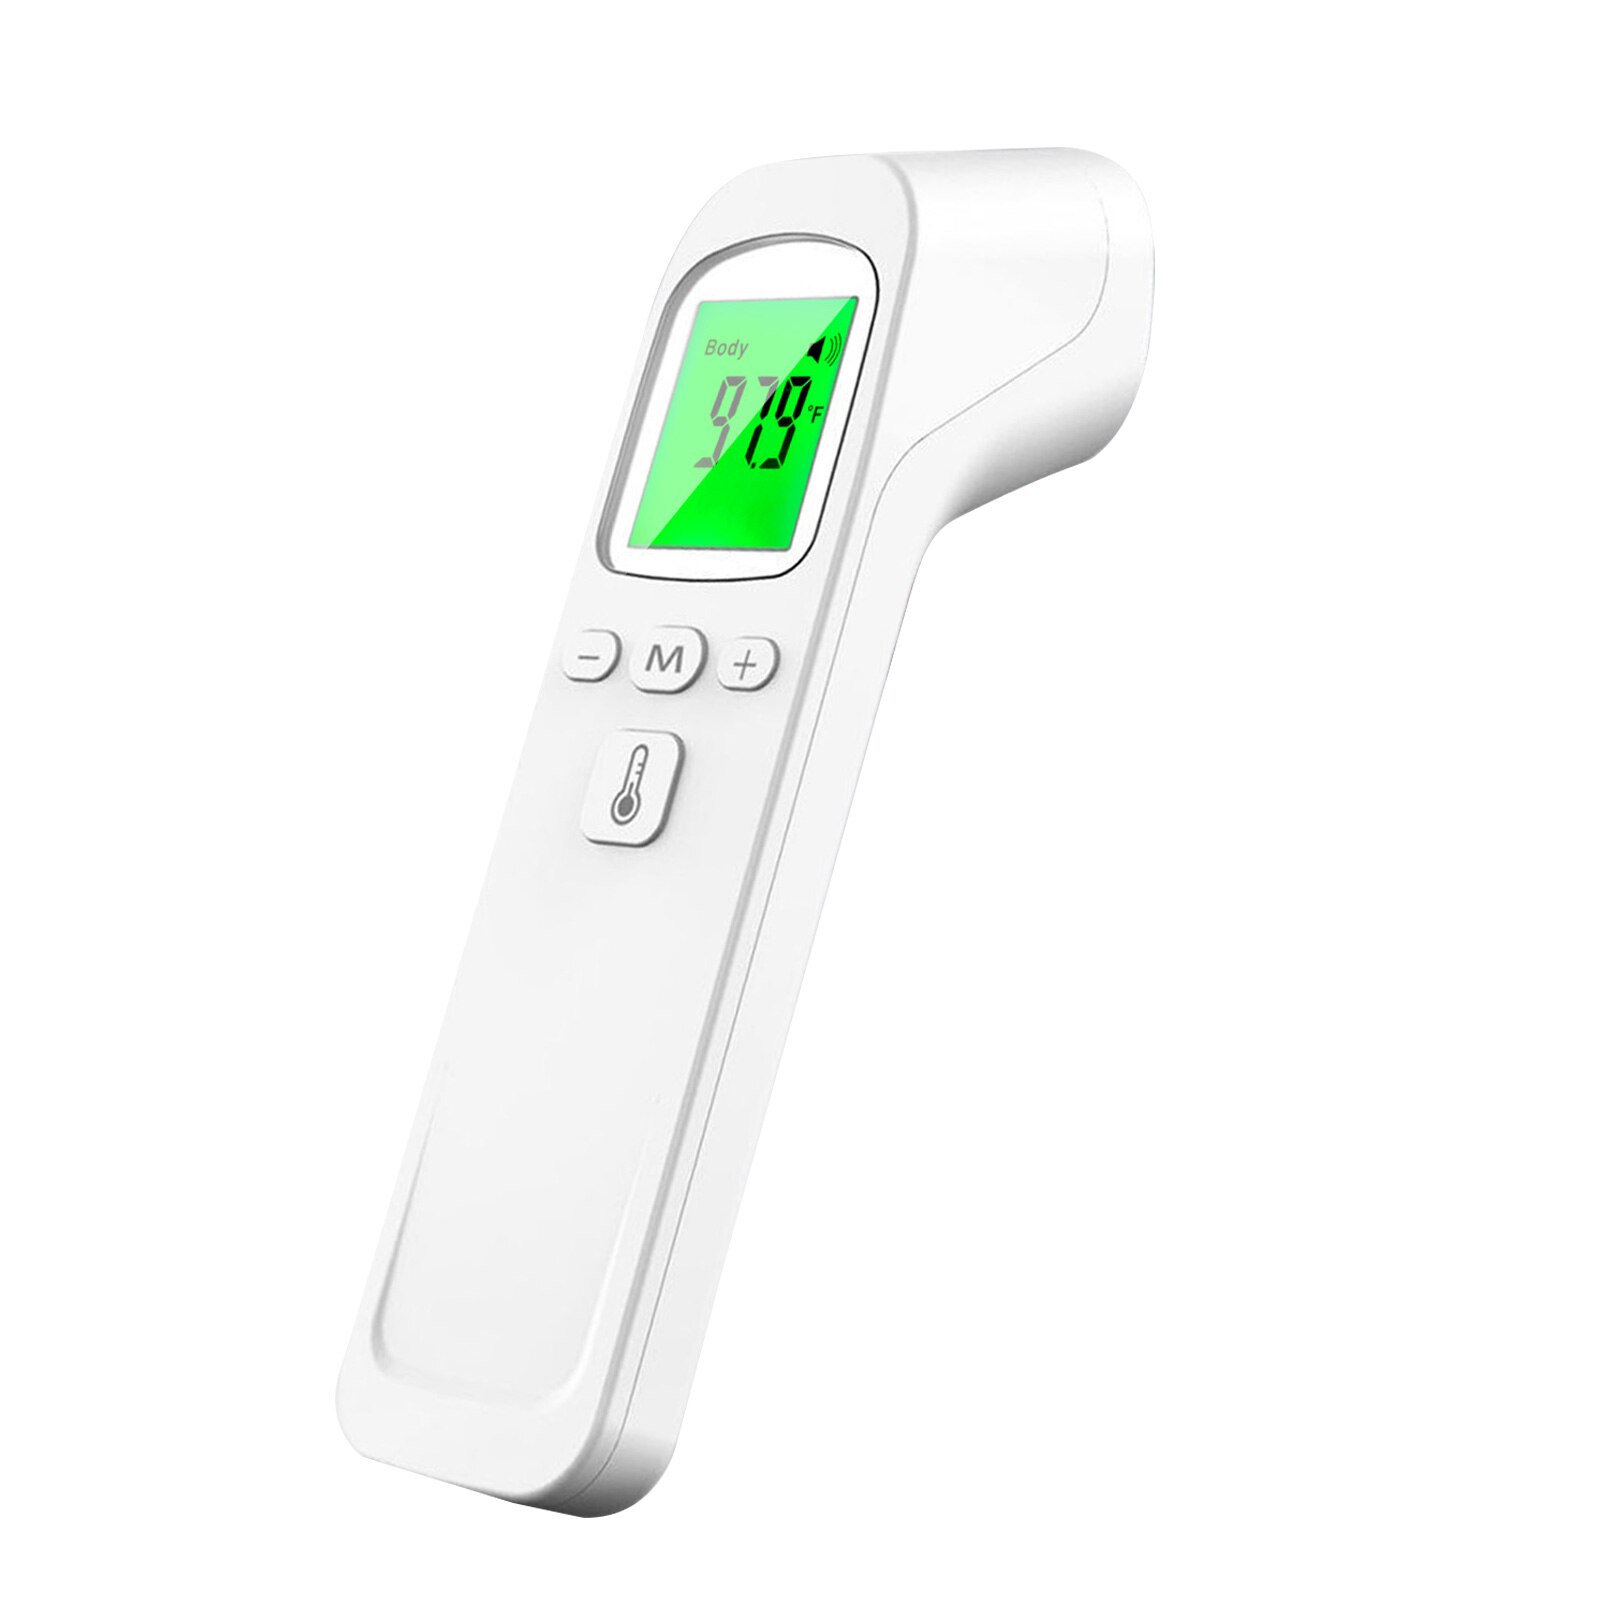 Infrarood Thermometer Voorhoofd Non-Contact Thermometer Baby Volwassenen Outdoor Home Digitale Infrarood Koorts Ear Body Thermometer